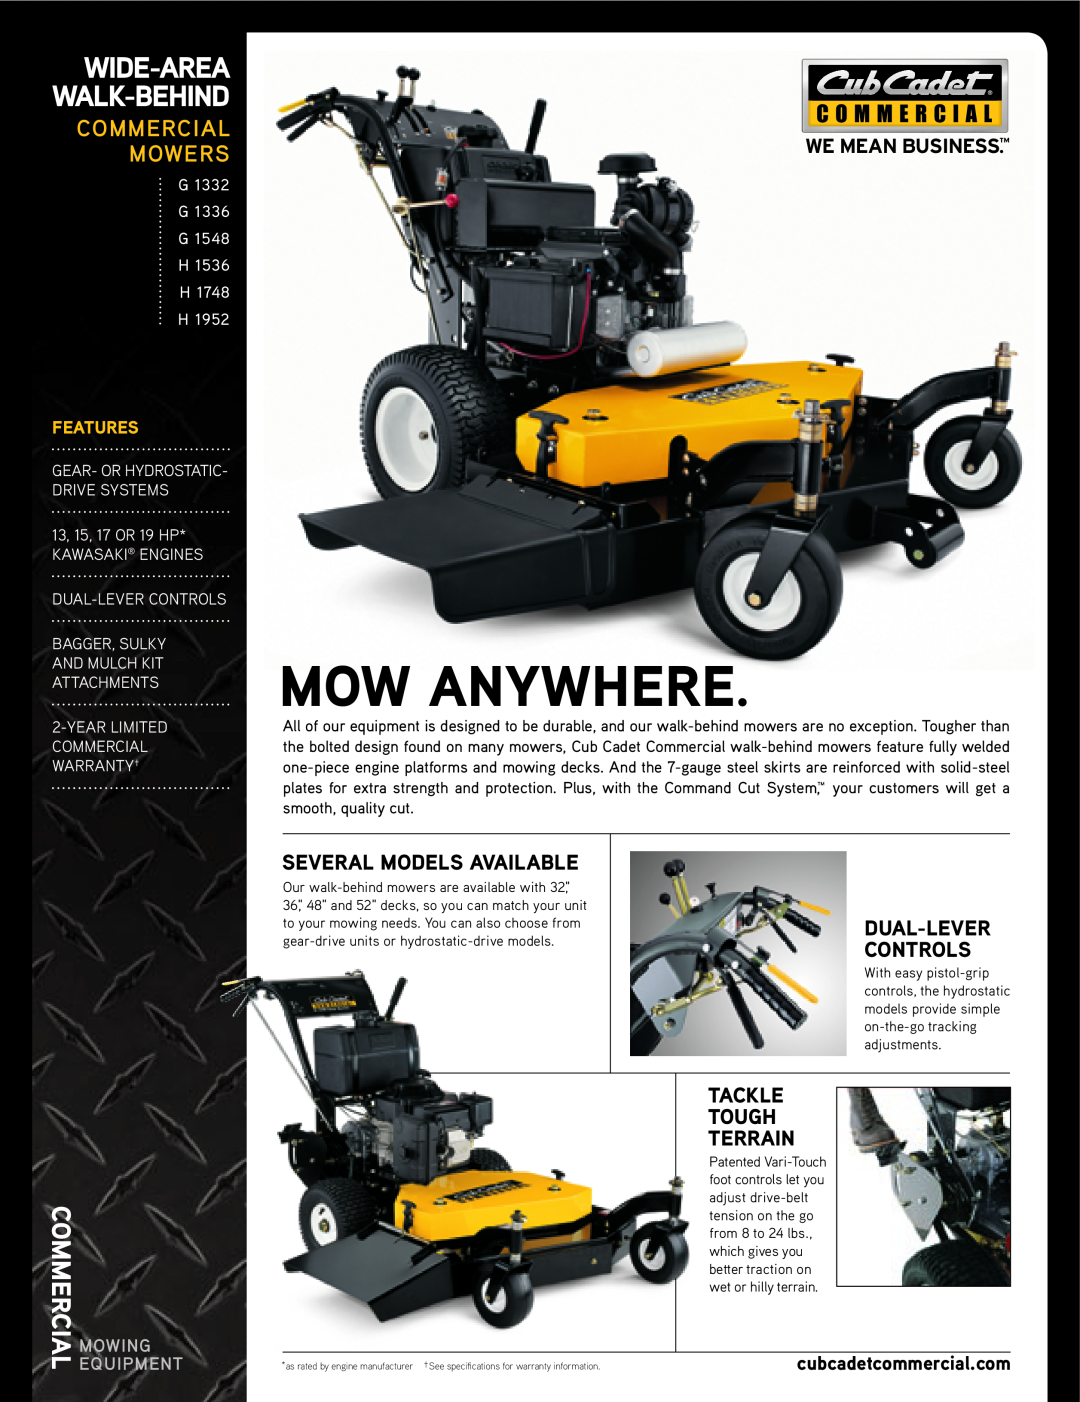 Cub Cadet G 1336 warranty Mow Anywhere, Wide-area WALK-BEHIND, Mowers, Commercialmowing, Several Models Available 